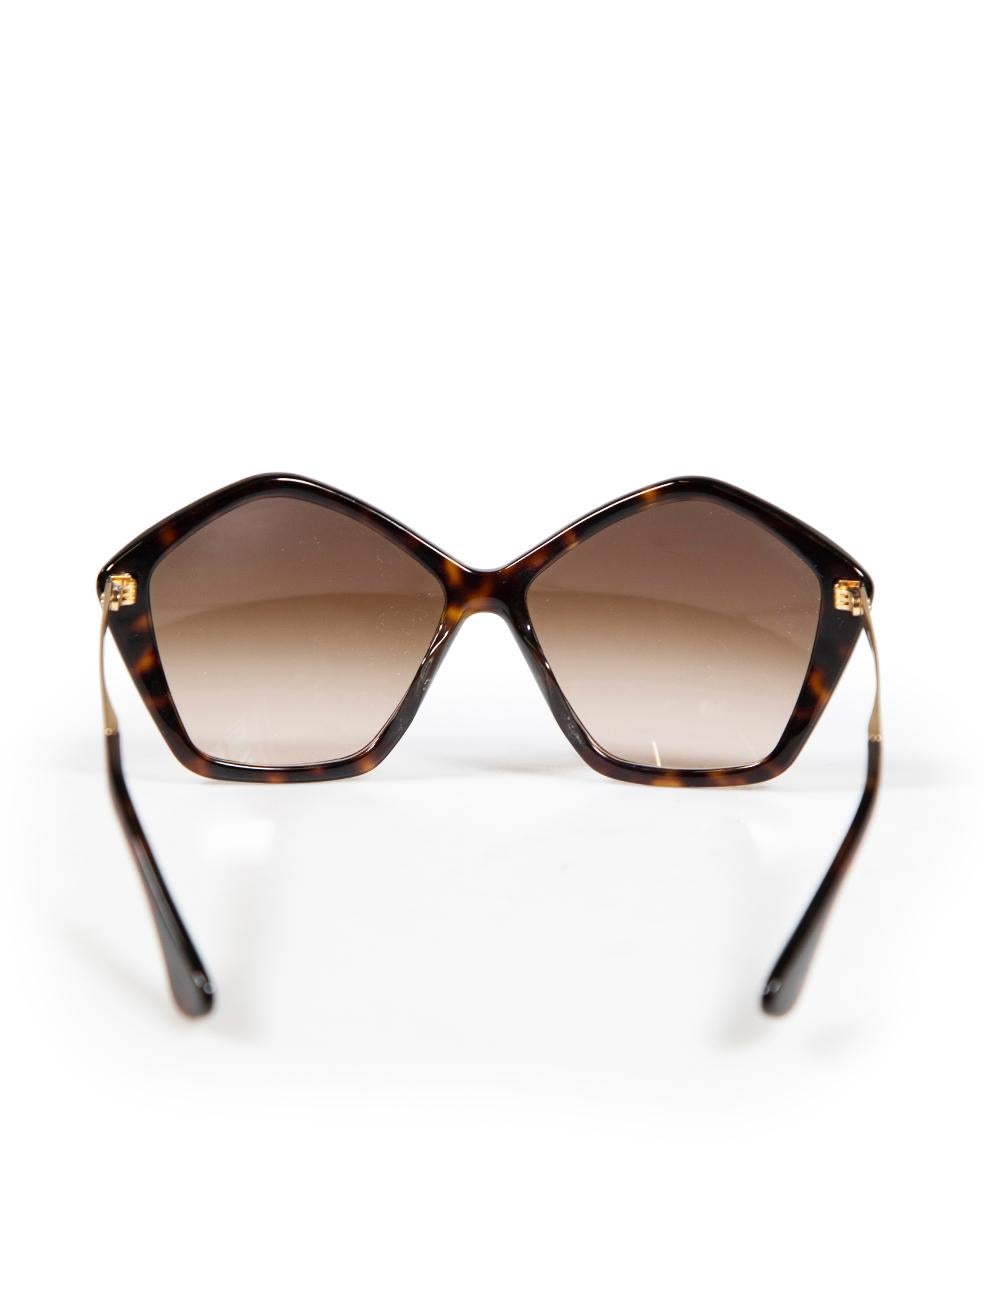 Miu Miu Brown Tortoiseshell Pentagon Frame Tinted Sunglasses In Good Condition For Sale In London, GB